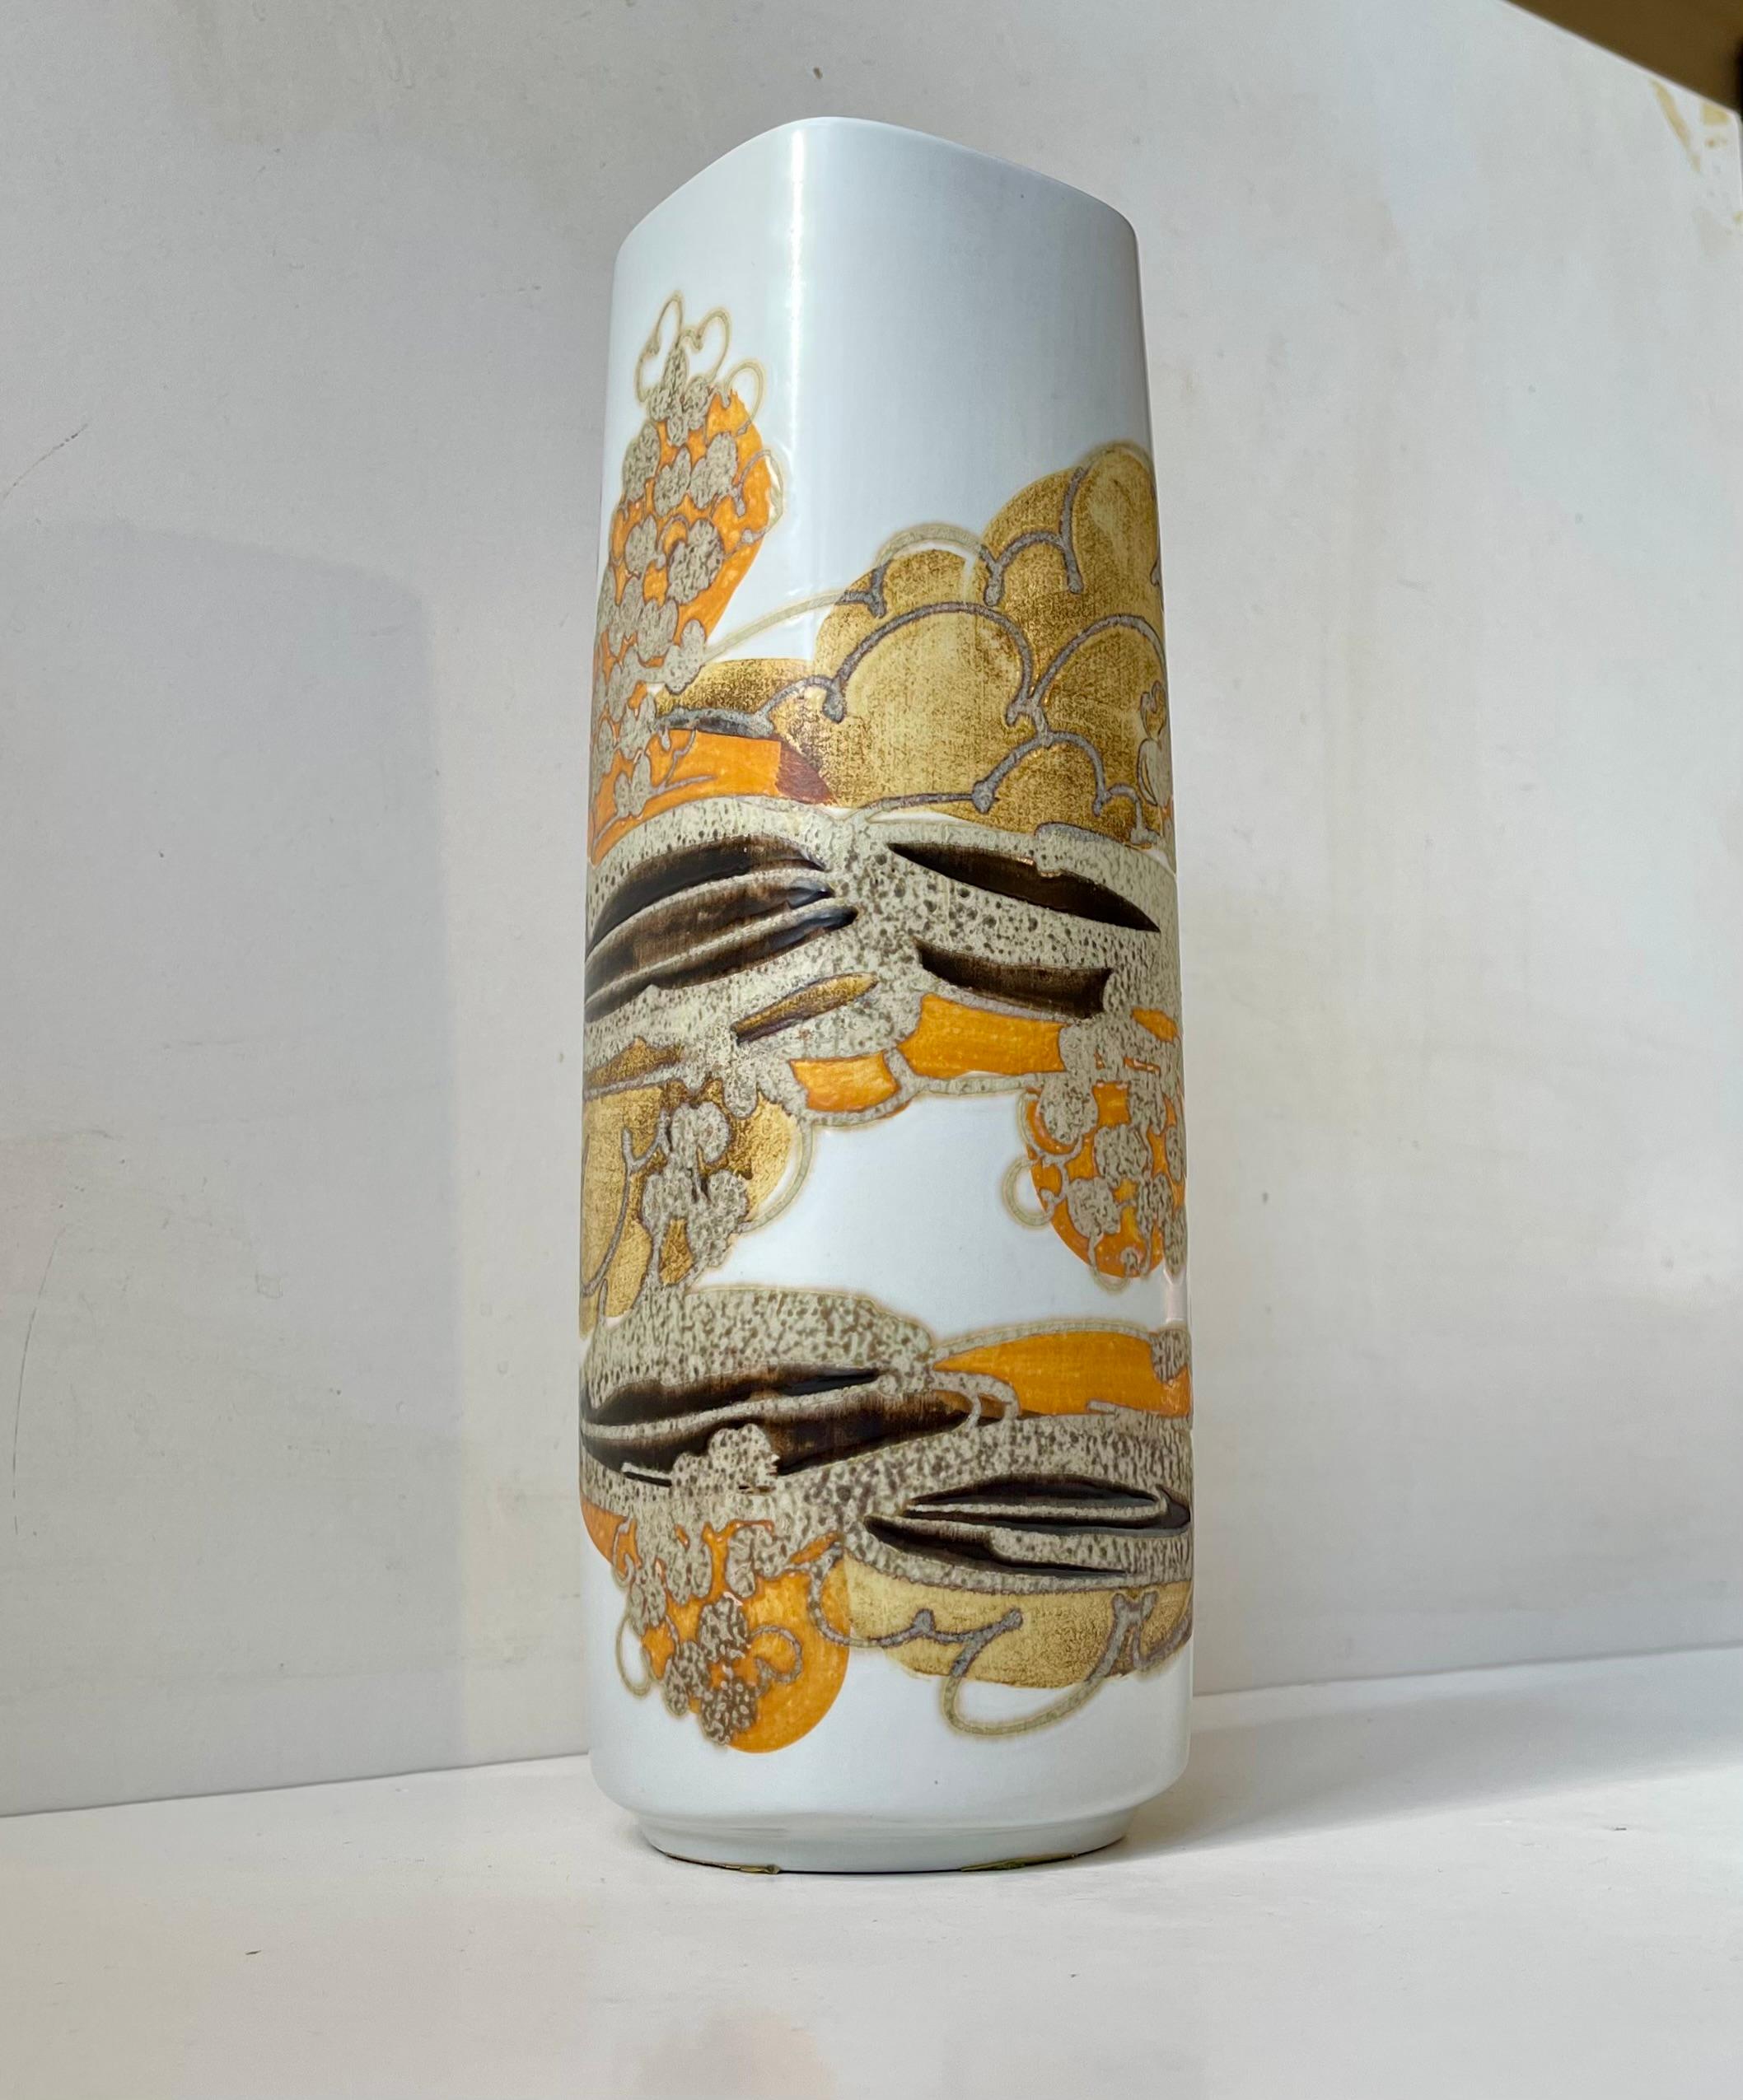 A tall fajance vase with abstract - modernistic glazed motif in contrasting yet earthy glazes. Designed by the danish ceramist Ellen Malmer (EM) and manufactured by Royal Copenhagen during the 1970s. Its fully signed, numbered and marked to the